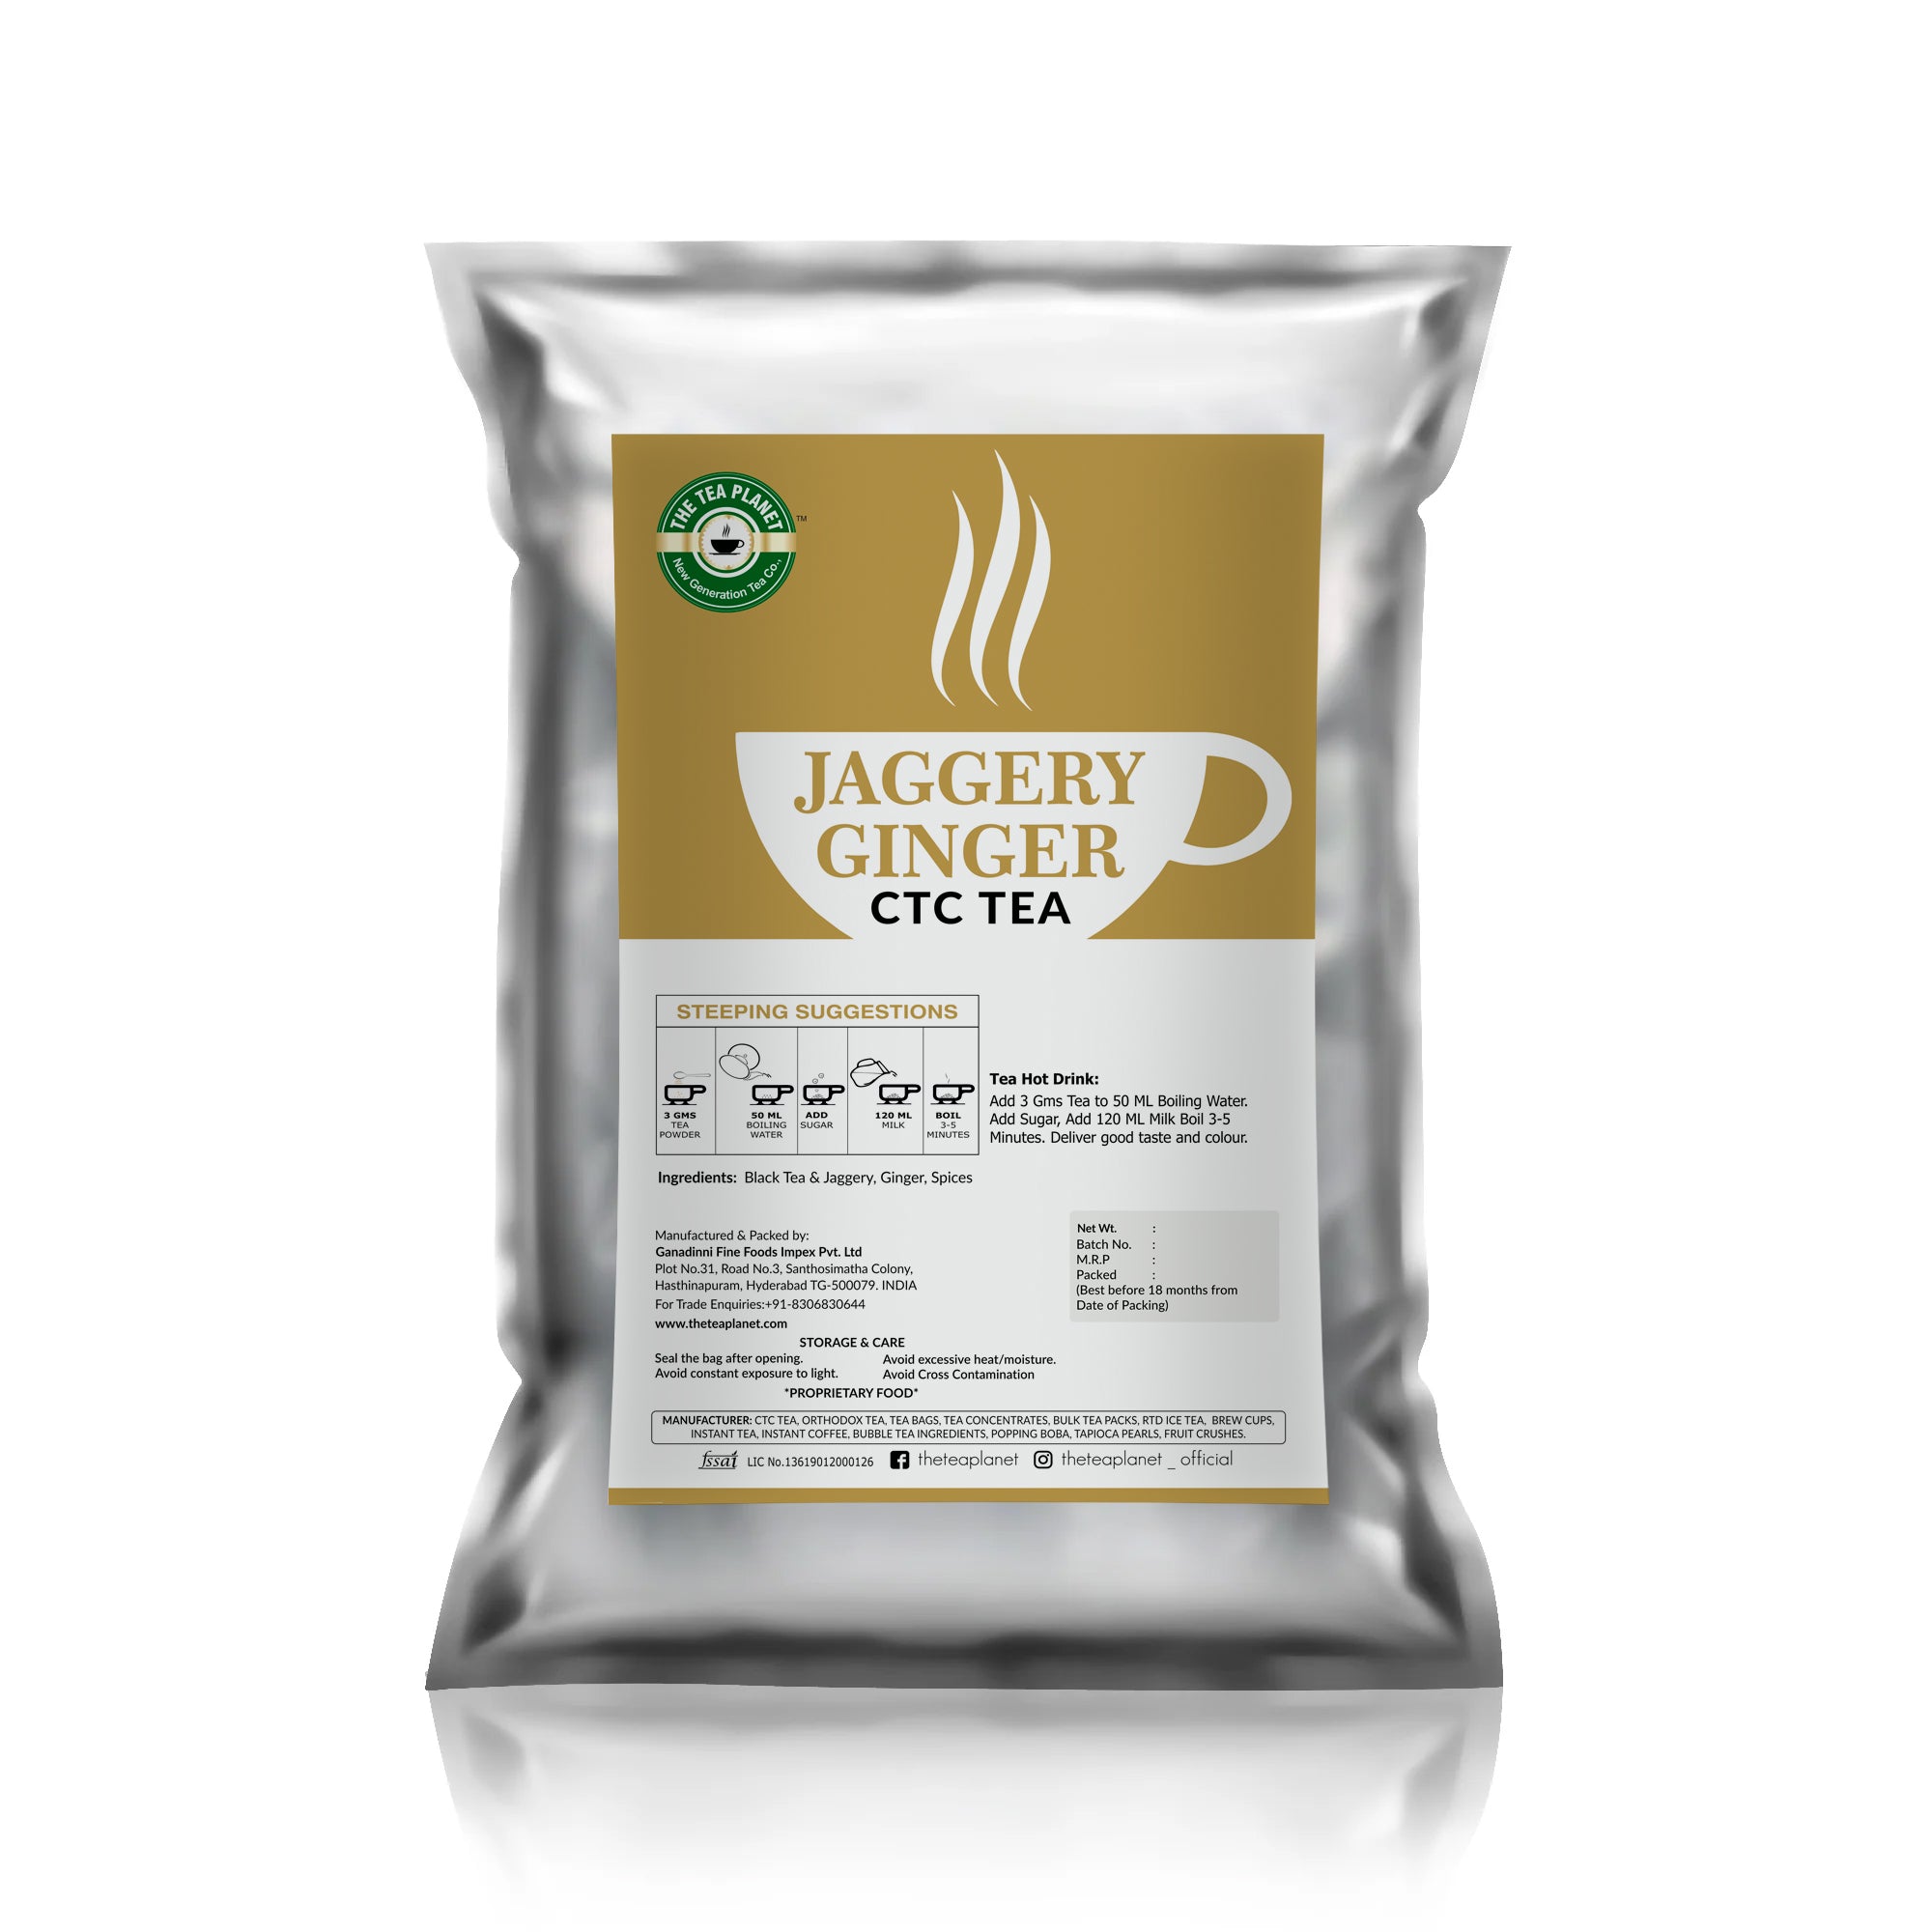 Jaggery Ginger Flavored CTC Tea - 1kg